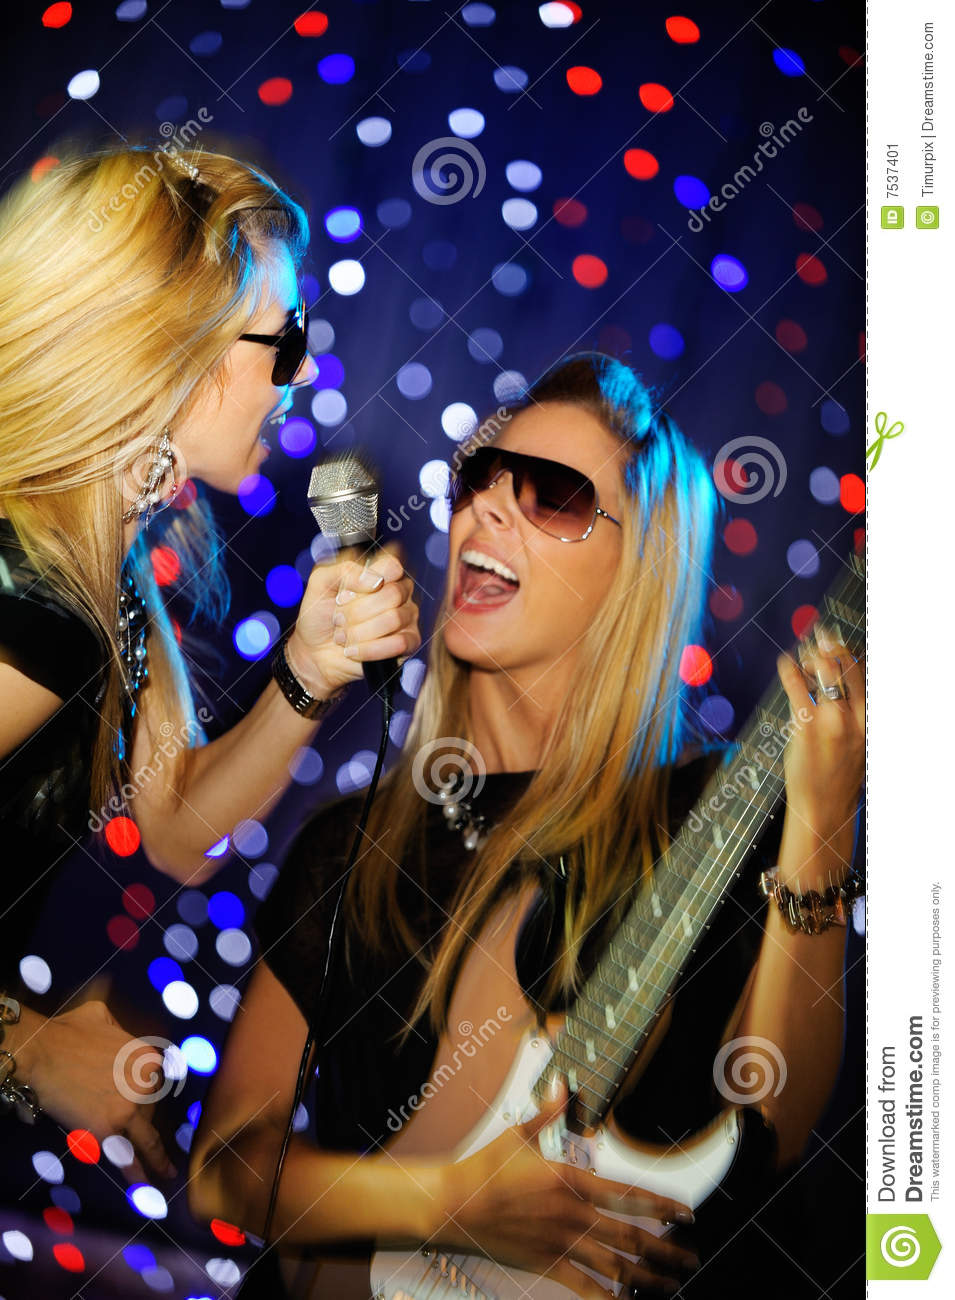 Female Singer And Guitar Player Stock Image   Image  7537401